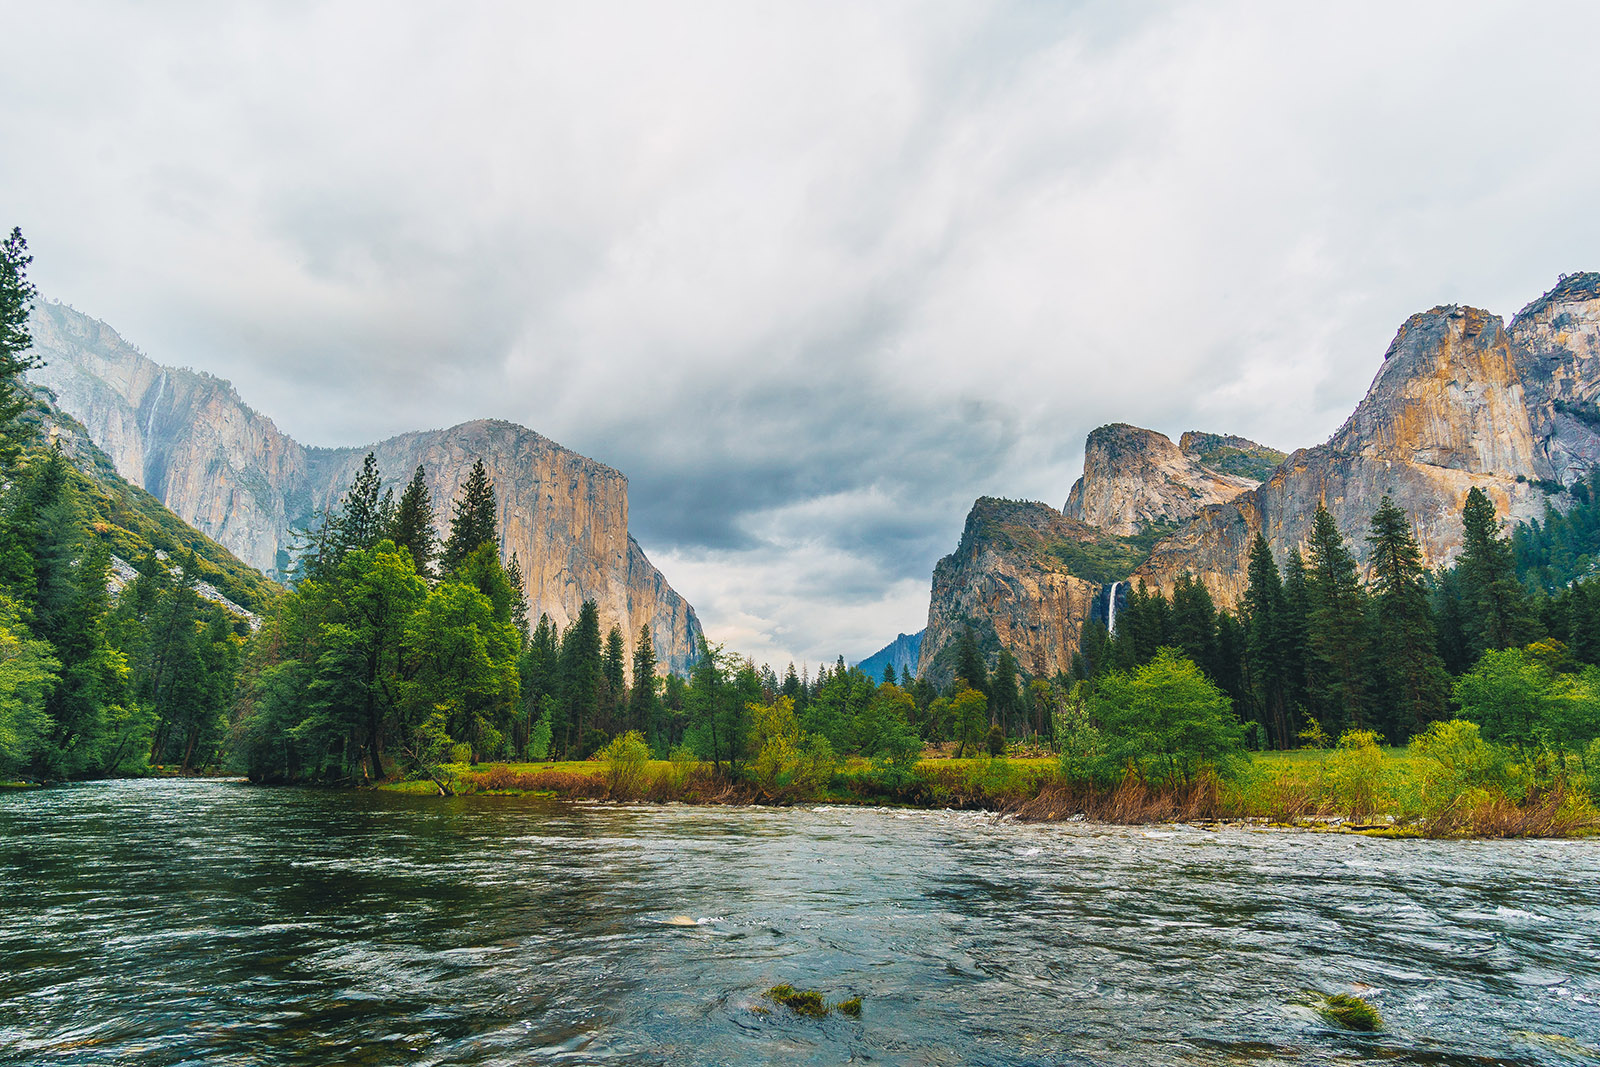 water and mountains in yosemite national park